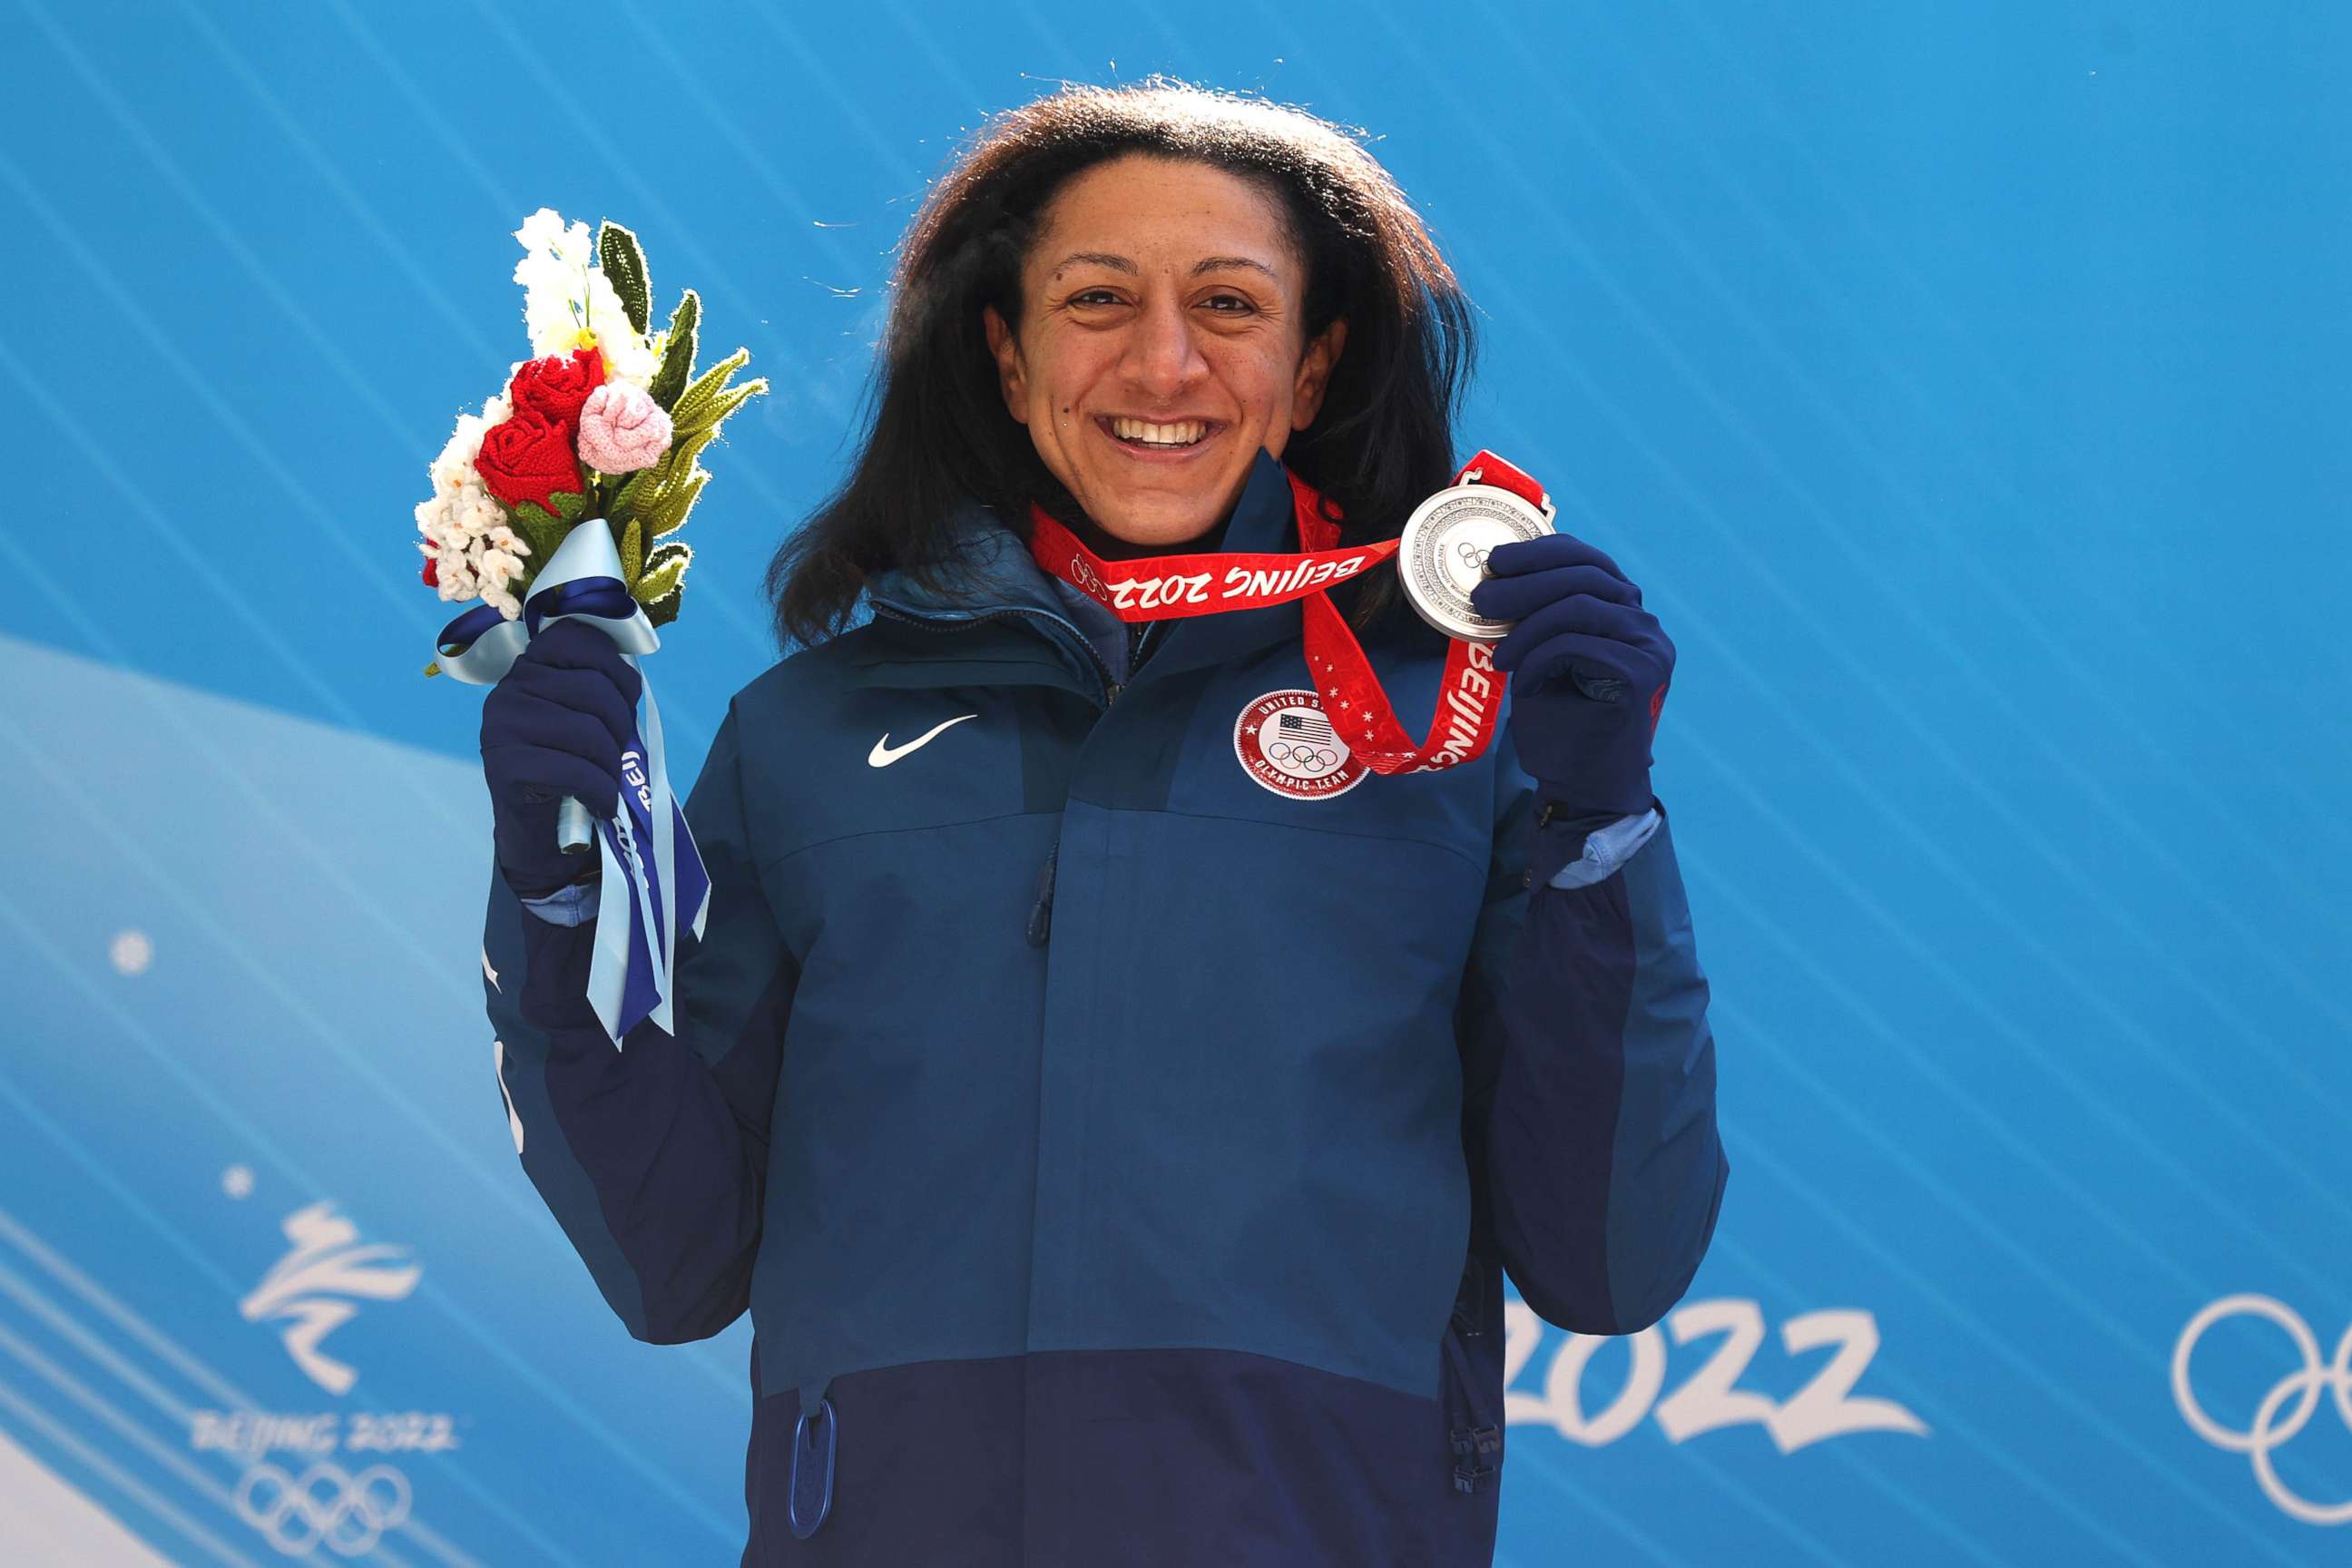 PHOTO: Silver medalist Elana Meyers Taylor of Team U.S. poses during the Women's Monobob Bobsleigh medal ceremony on day 10 of Beijing 2022 Winter Olympic Games at National Sliding Centre, Feb. 14, 2022, in Yanqing, China.